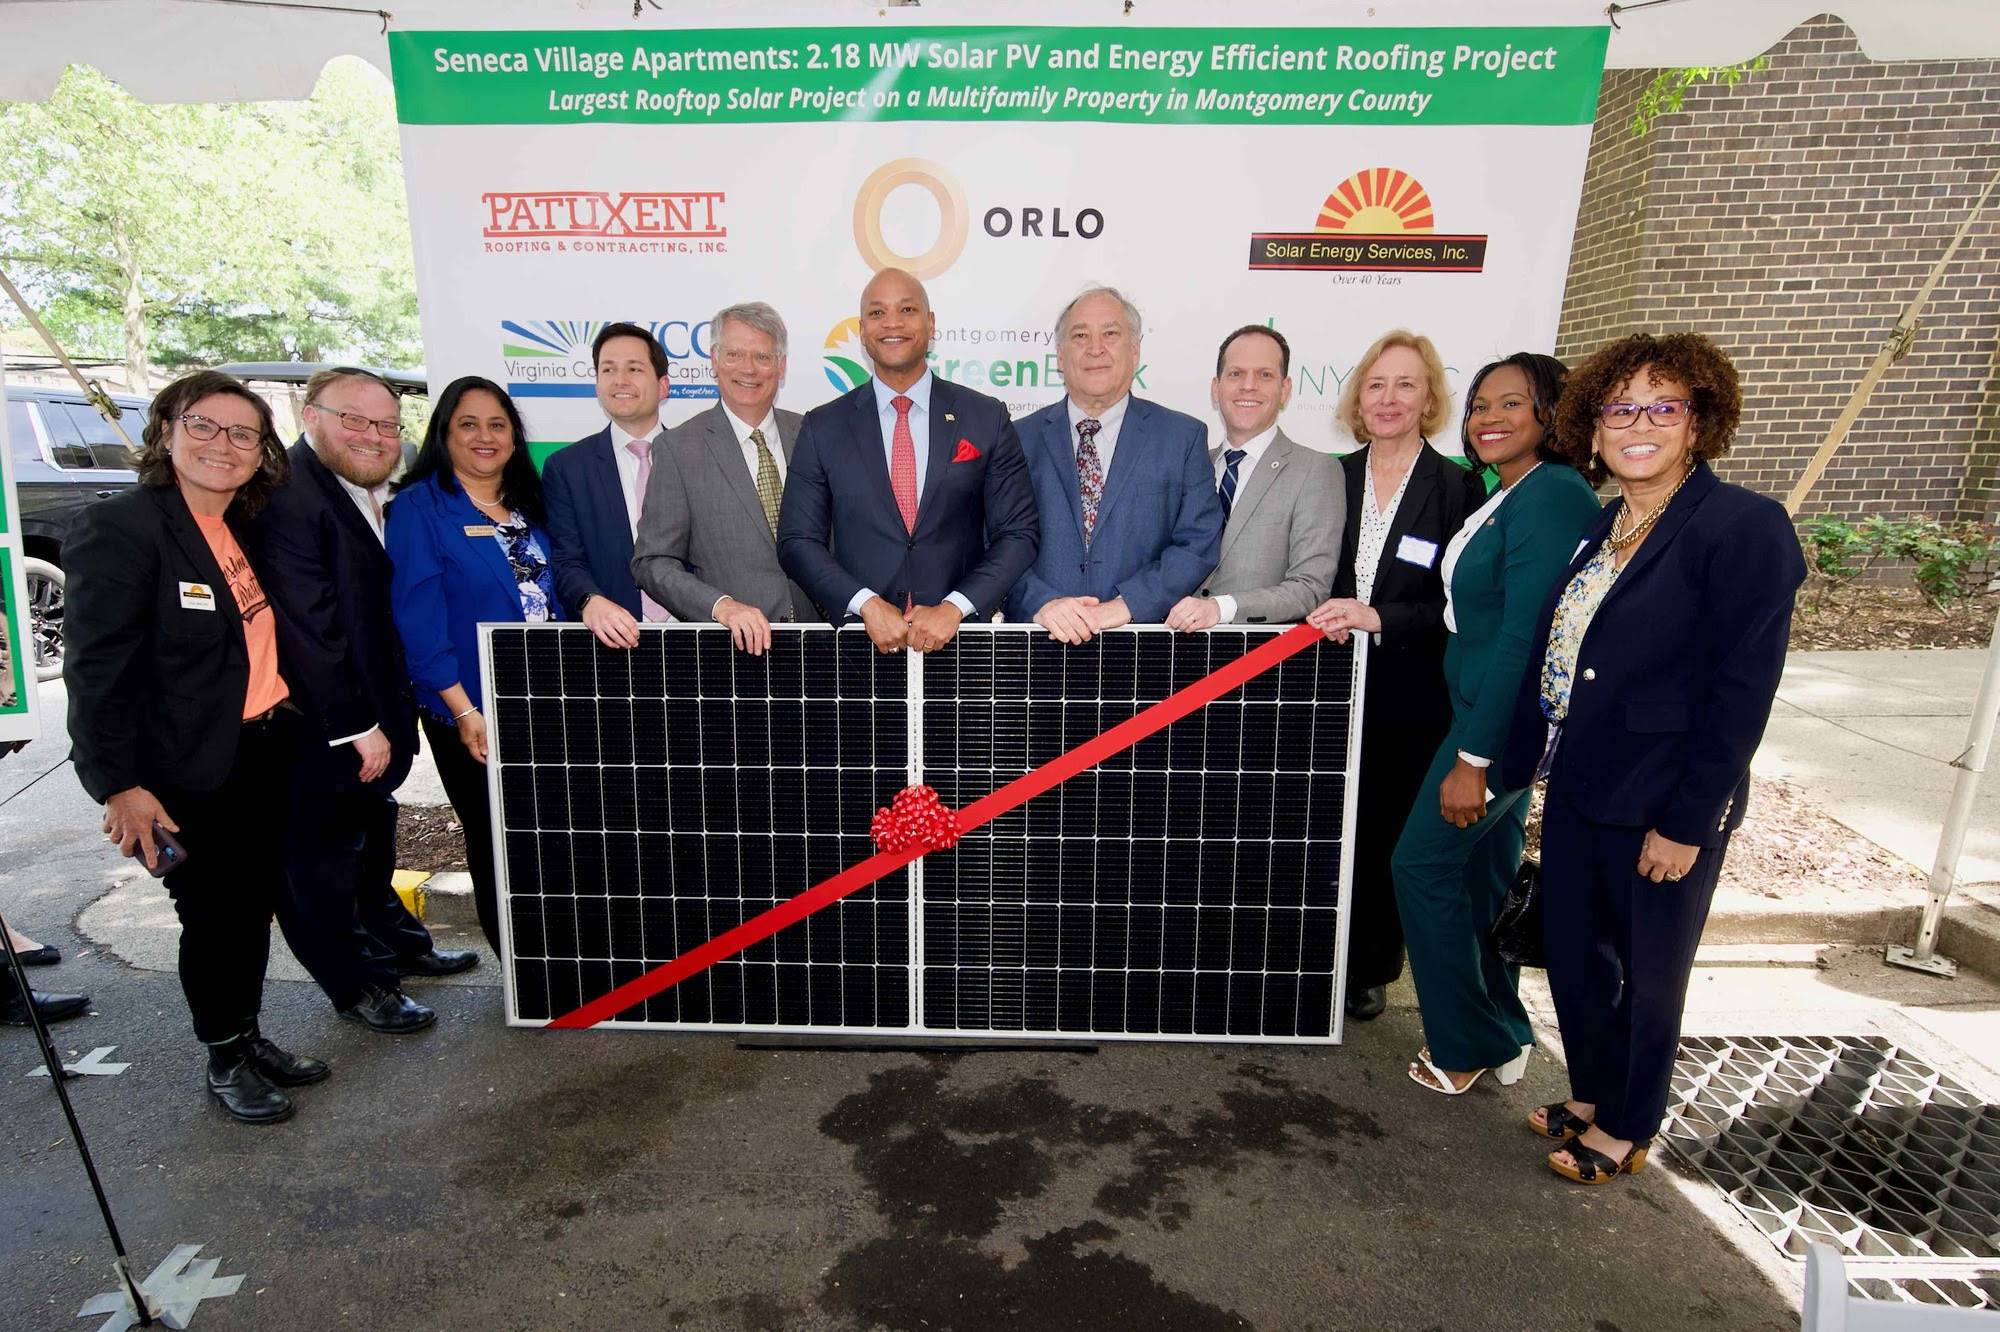 Governor Wes Moore kicked off the More Opportunity Tour, announcing the largest rooftop solar project on an affordable multifamily property ever undertaken in Montgomery County.